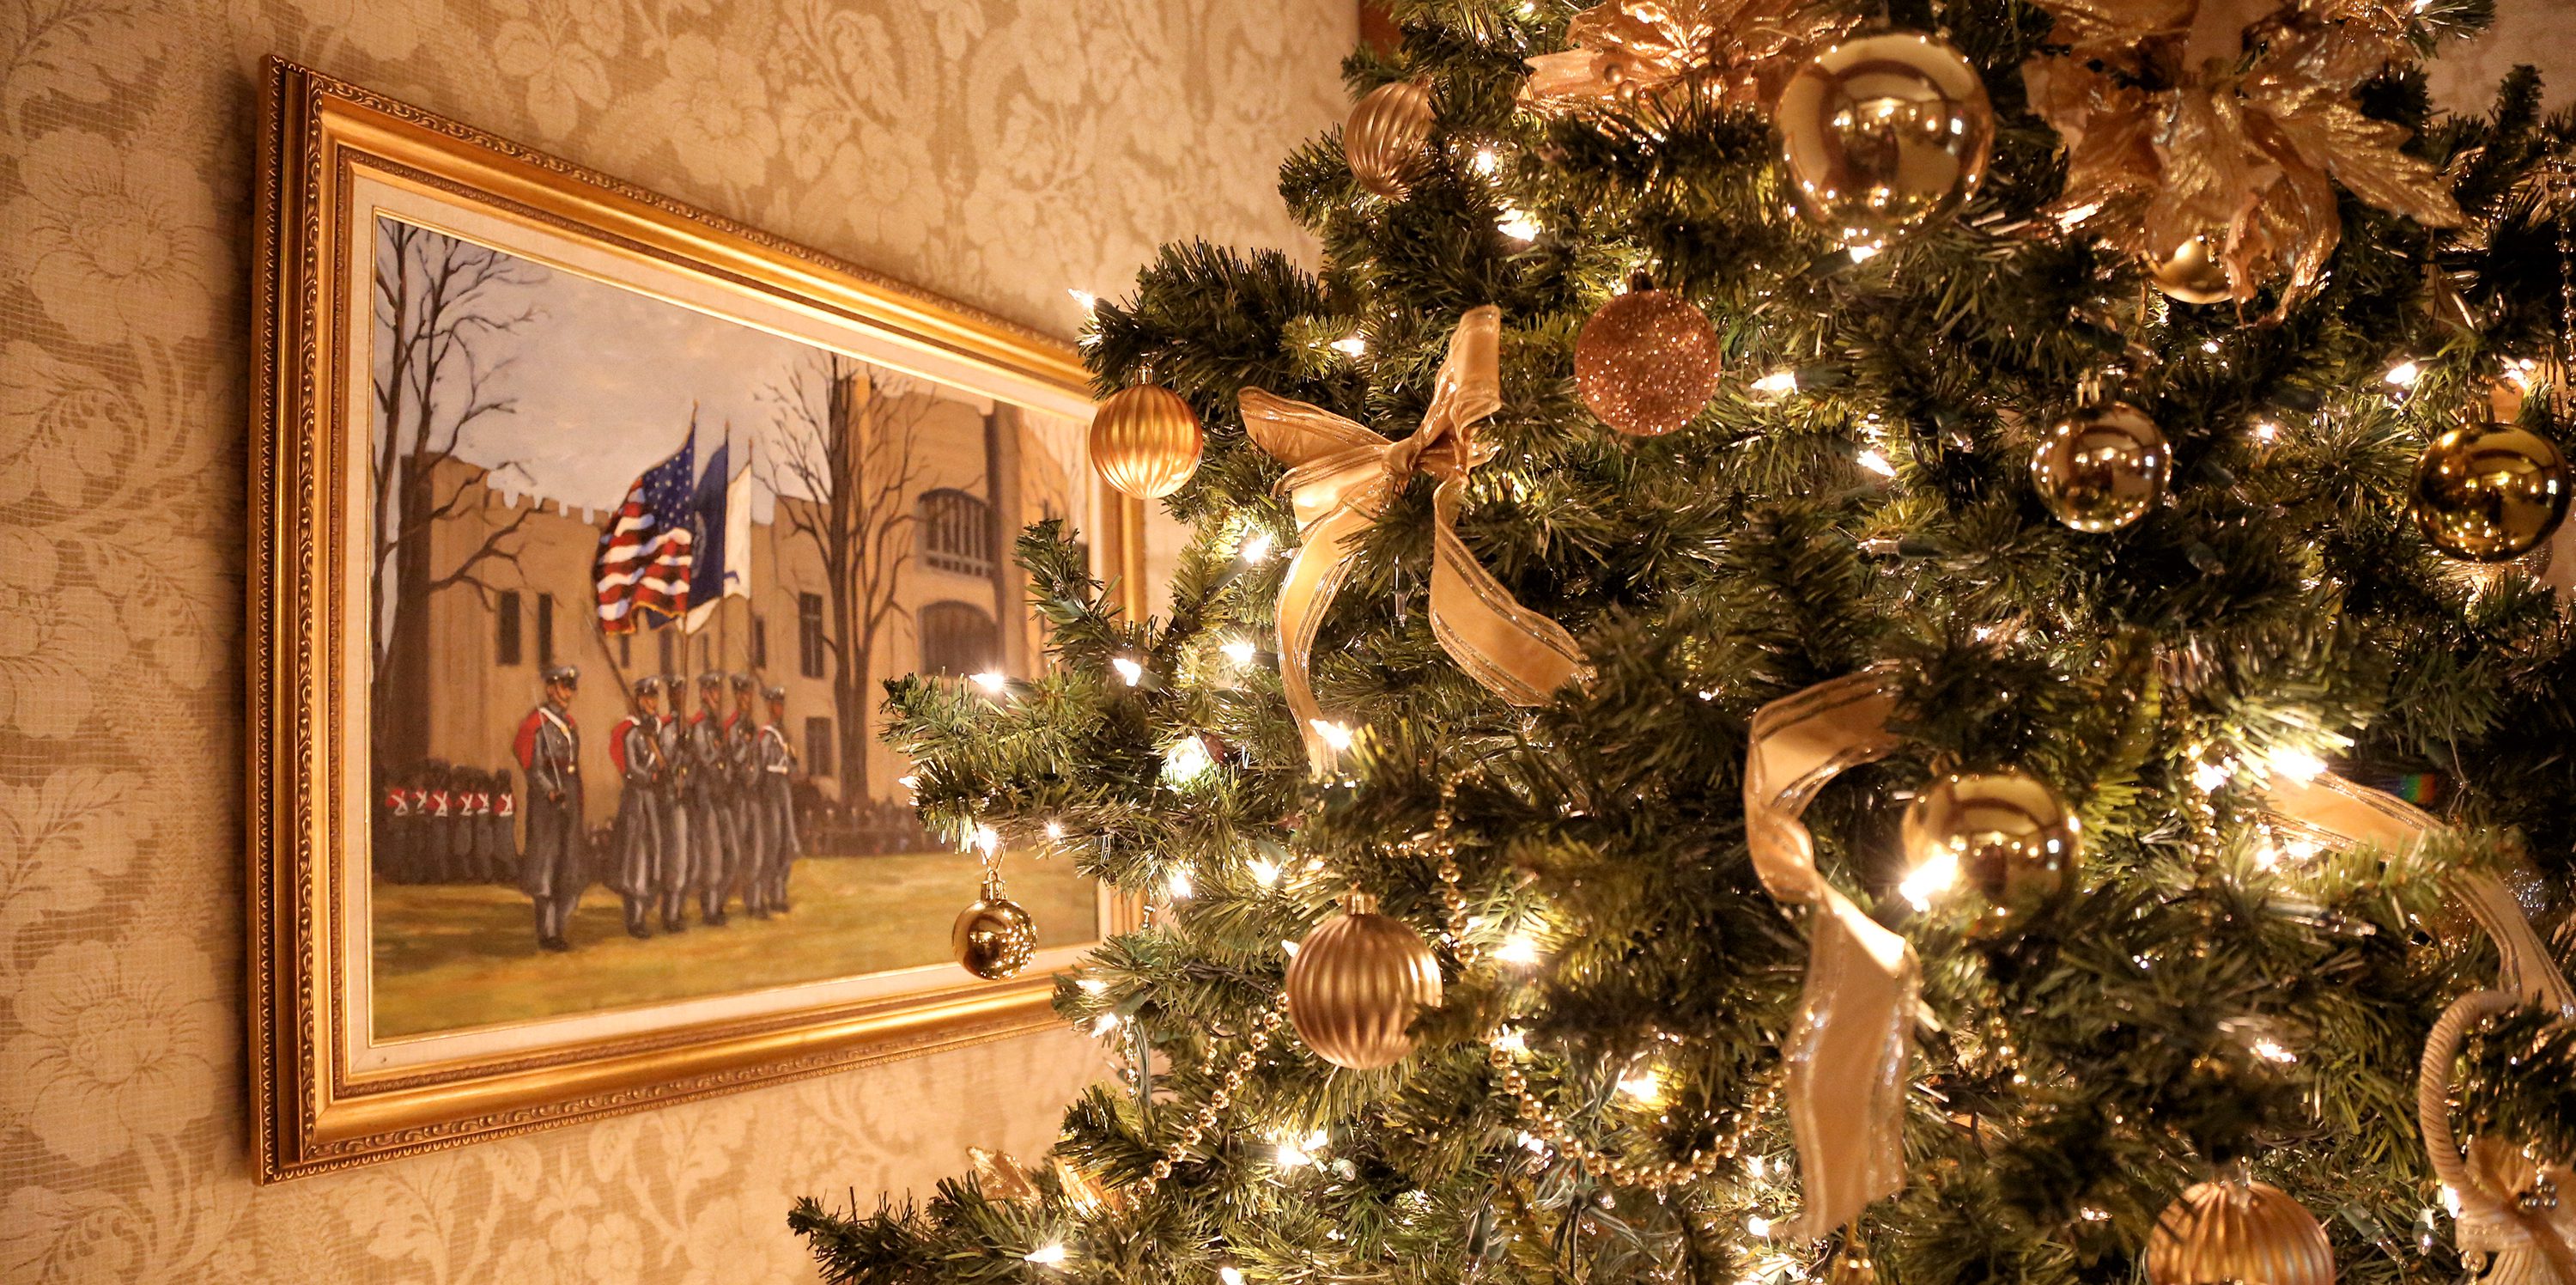 Christmas tree with VMI painting in background